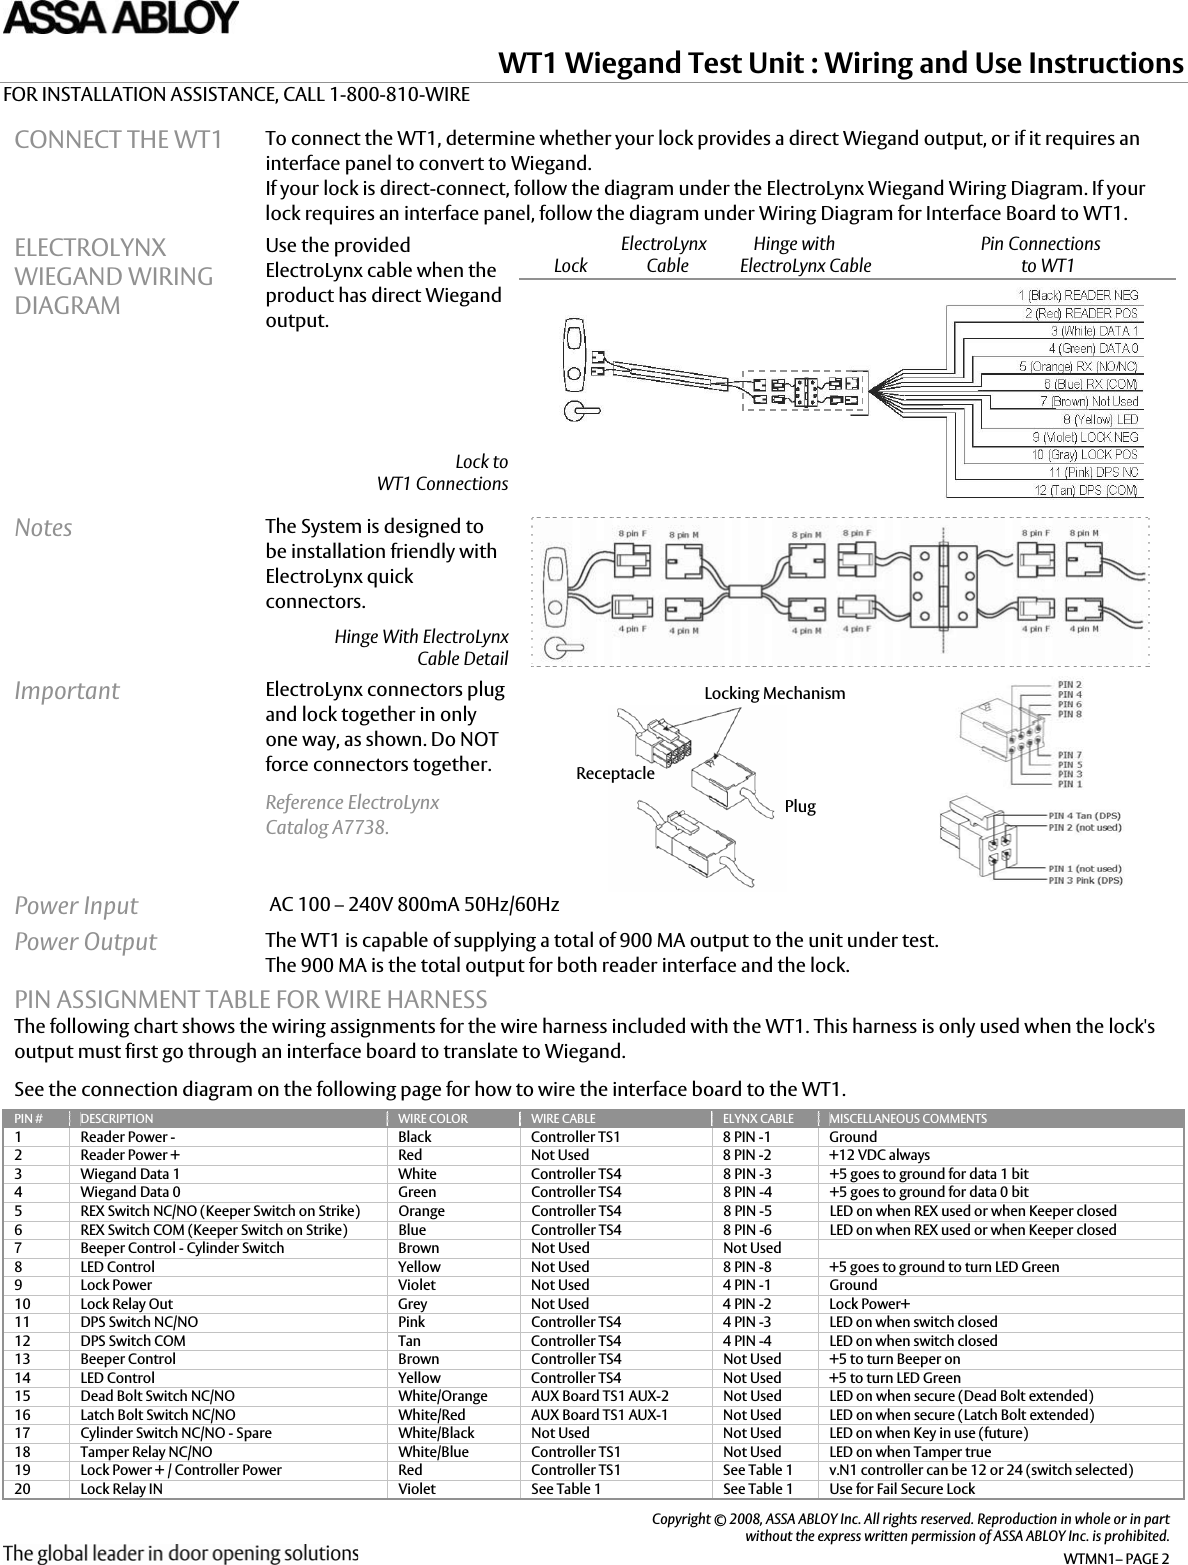 Page 2 of 4 - Securitron - WTMN1A_24SEP08 WT1 Wiring And Use Instructions I 500-63020 A